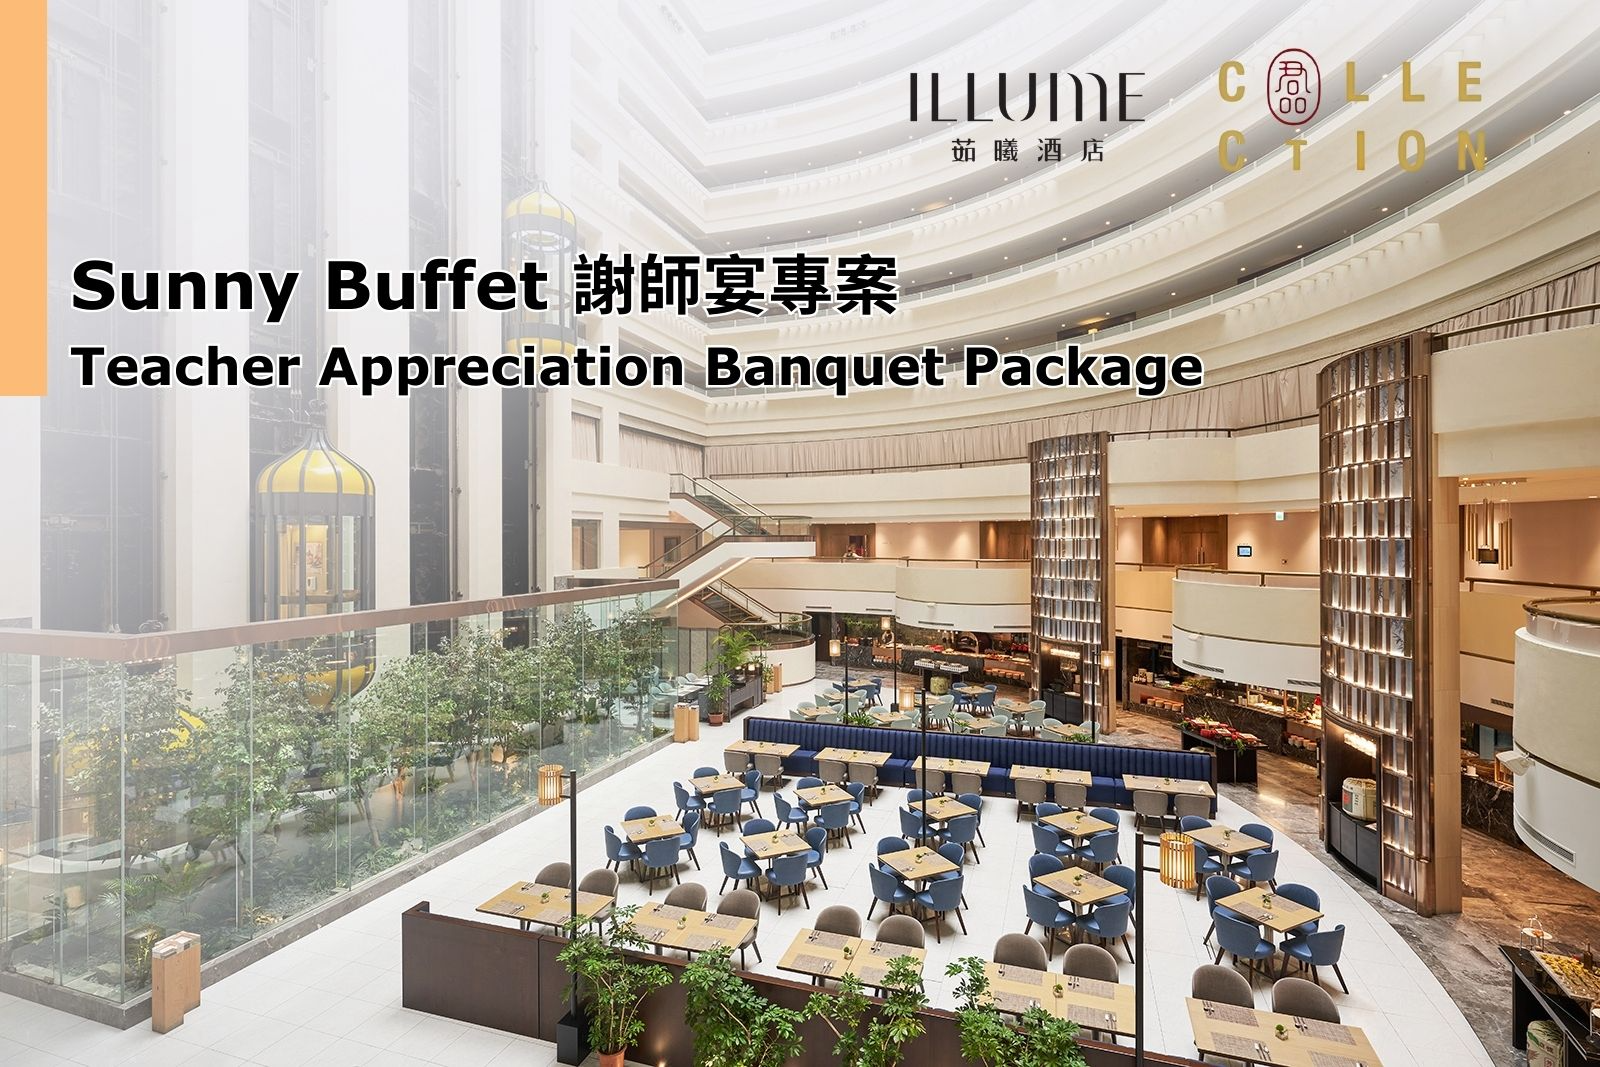 Sunny Buffet presents the “Teacher Appreciation Banquet Package,” where for every group of 10 attendees, one person dines for free.